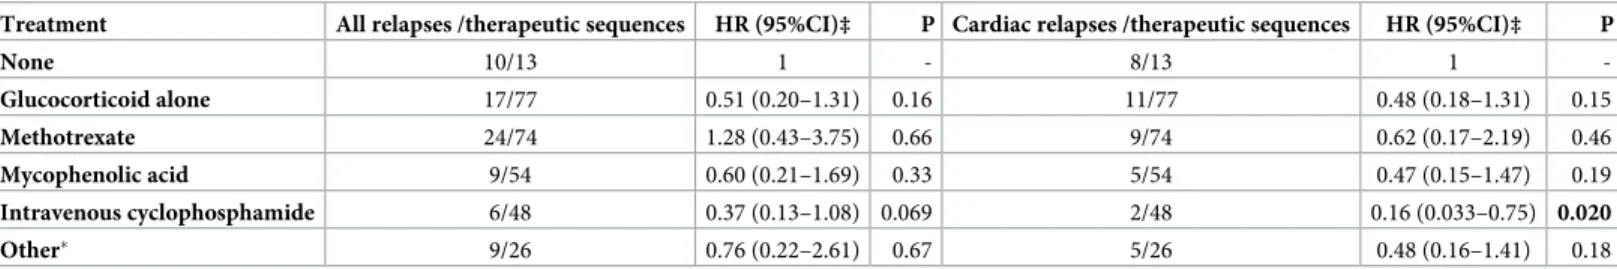 Table 5. Hazards ratios for relapses (any localization, left; cardiac relapses, right) in cardiac sarcoidosis patients, according to immunosuppressive or immunomod- immunomod-ulatory treatments.